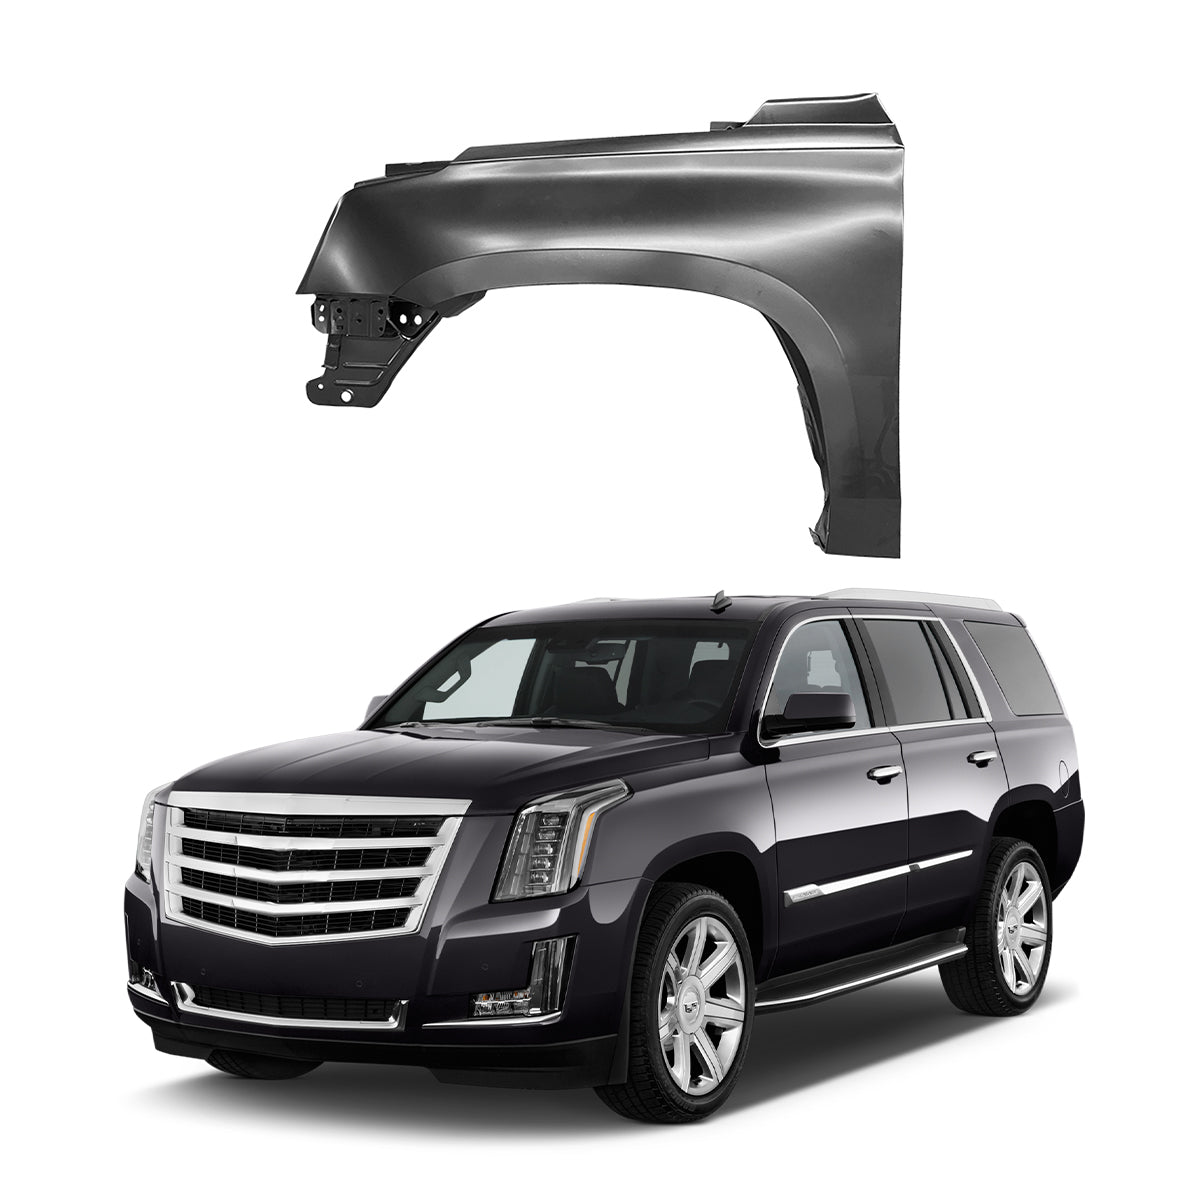 Replacement FRONT FENDER, LH, 2015-2020 Cadillac Escalade, 84216913, (Alum)